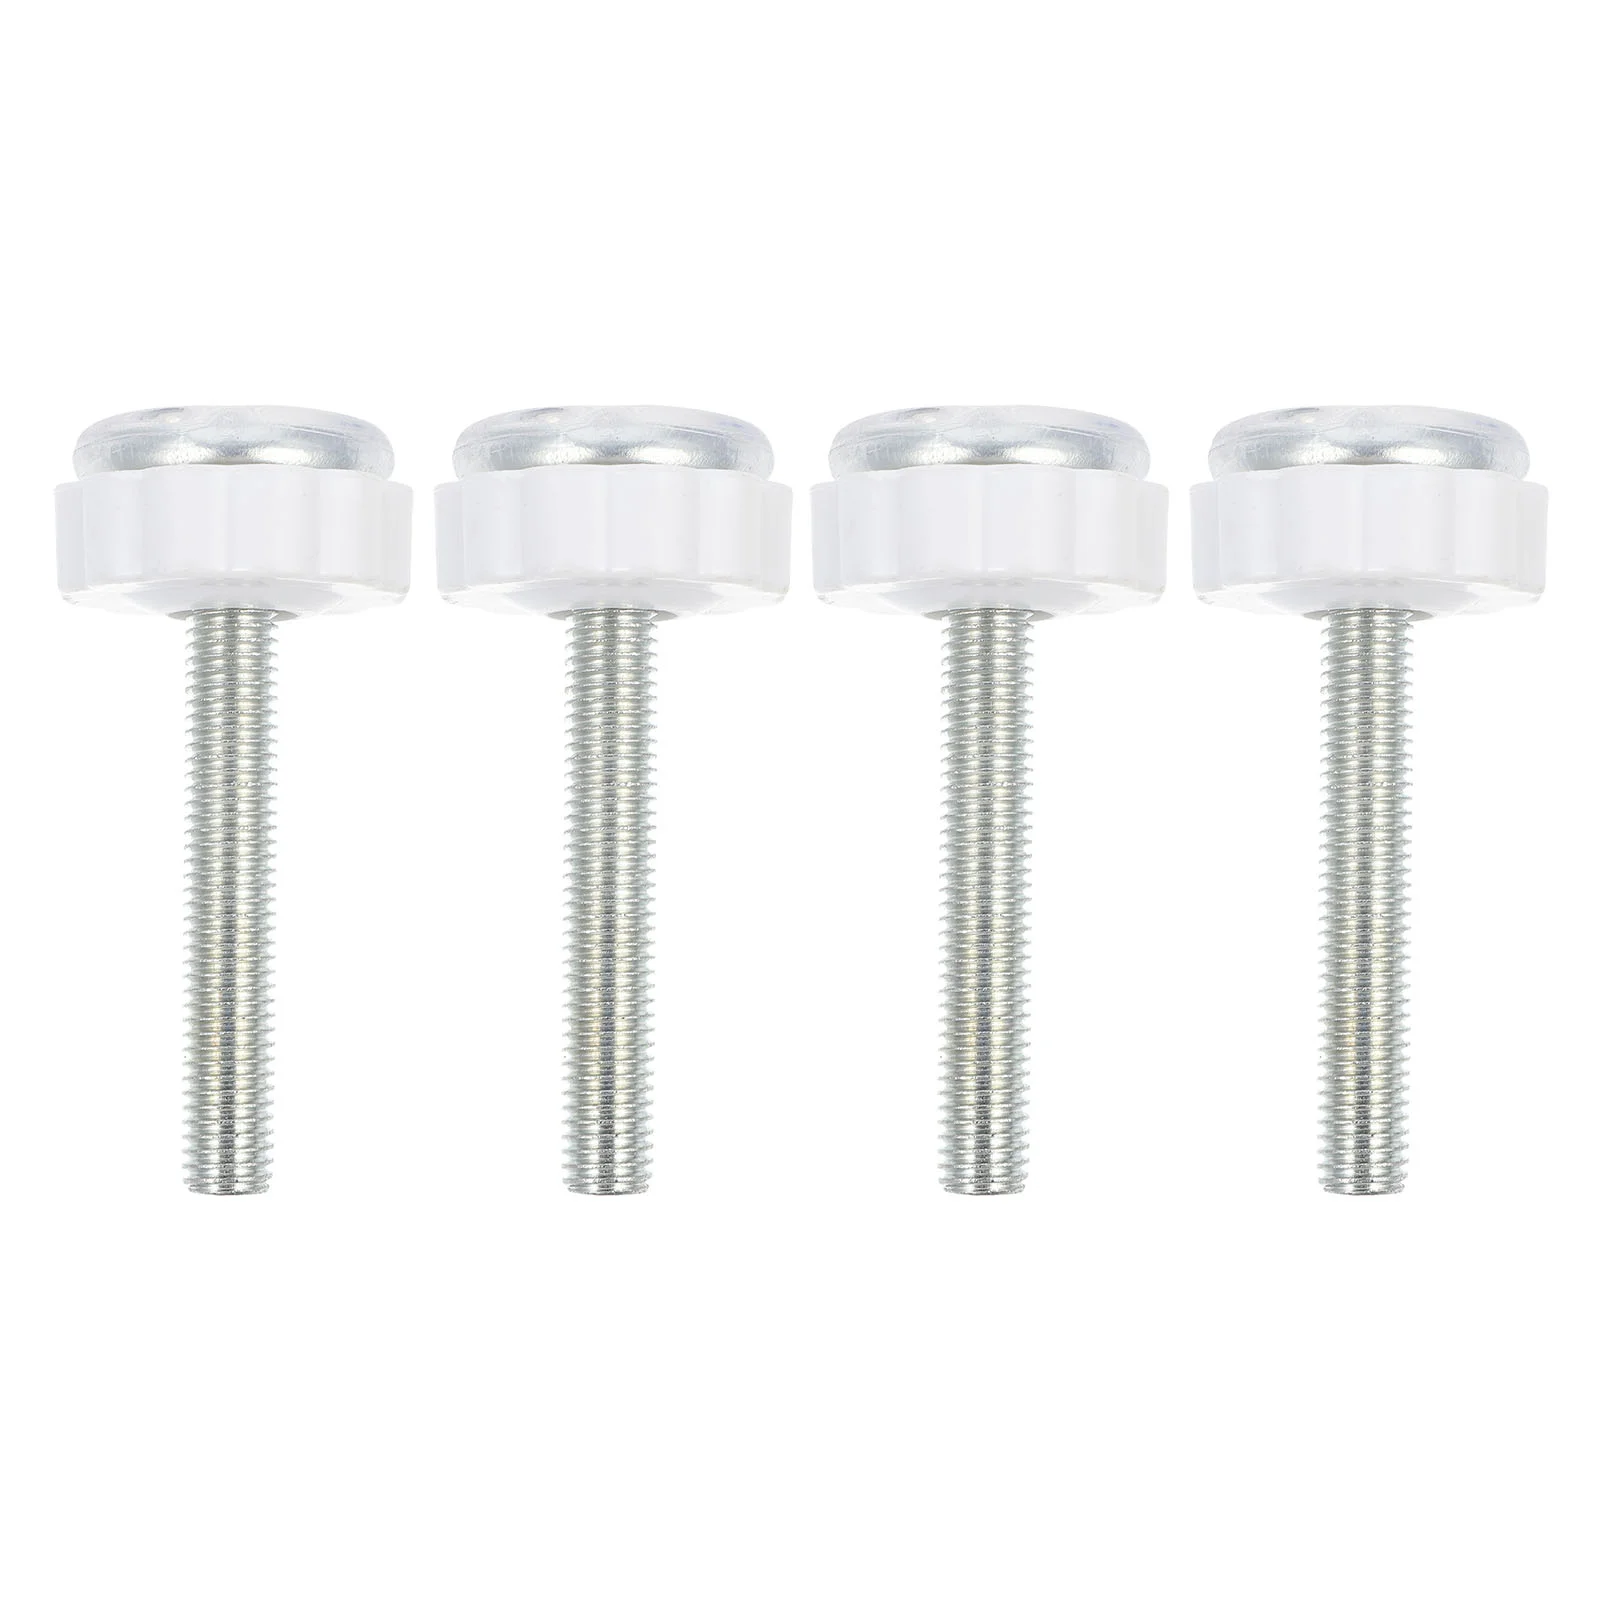 

4 Pcs Bolt Fittings Baby Gate Threaded Spindle Rods Replacements Accessories Screw Bolts Kit Steel Core Dog Gates Accessory